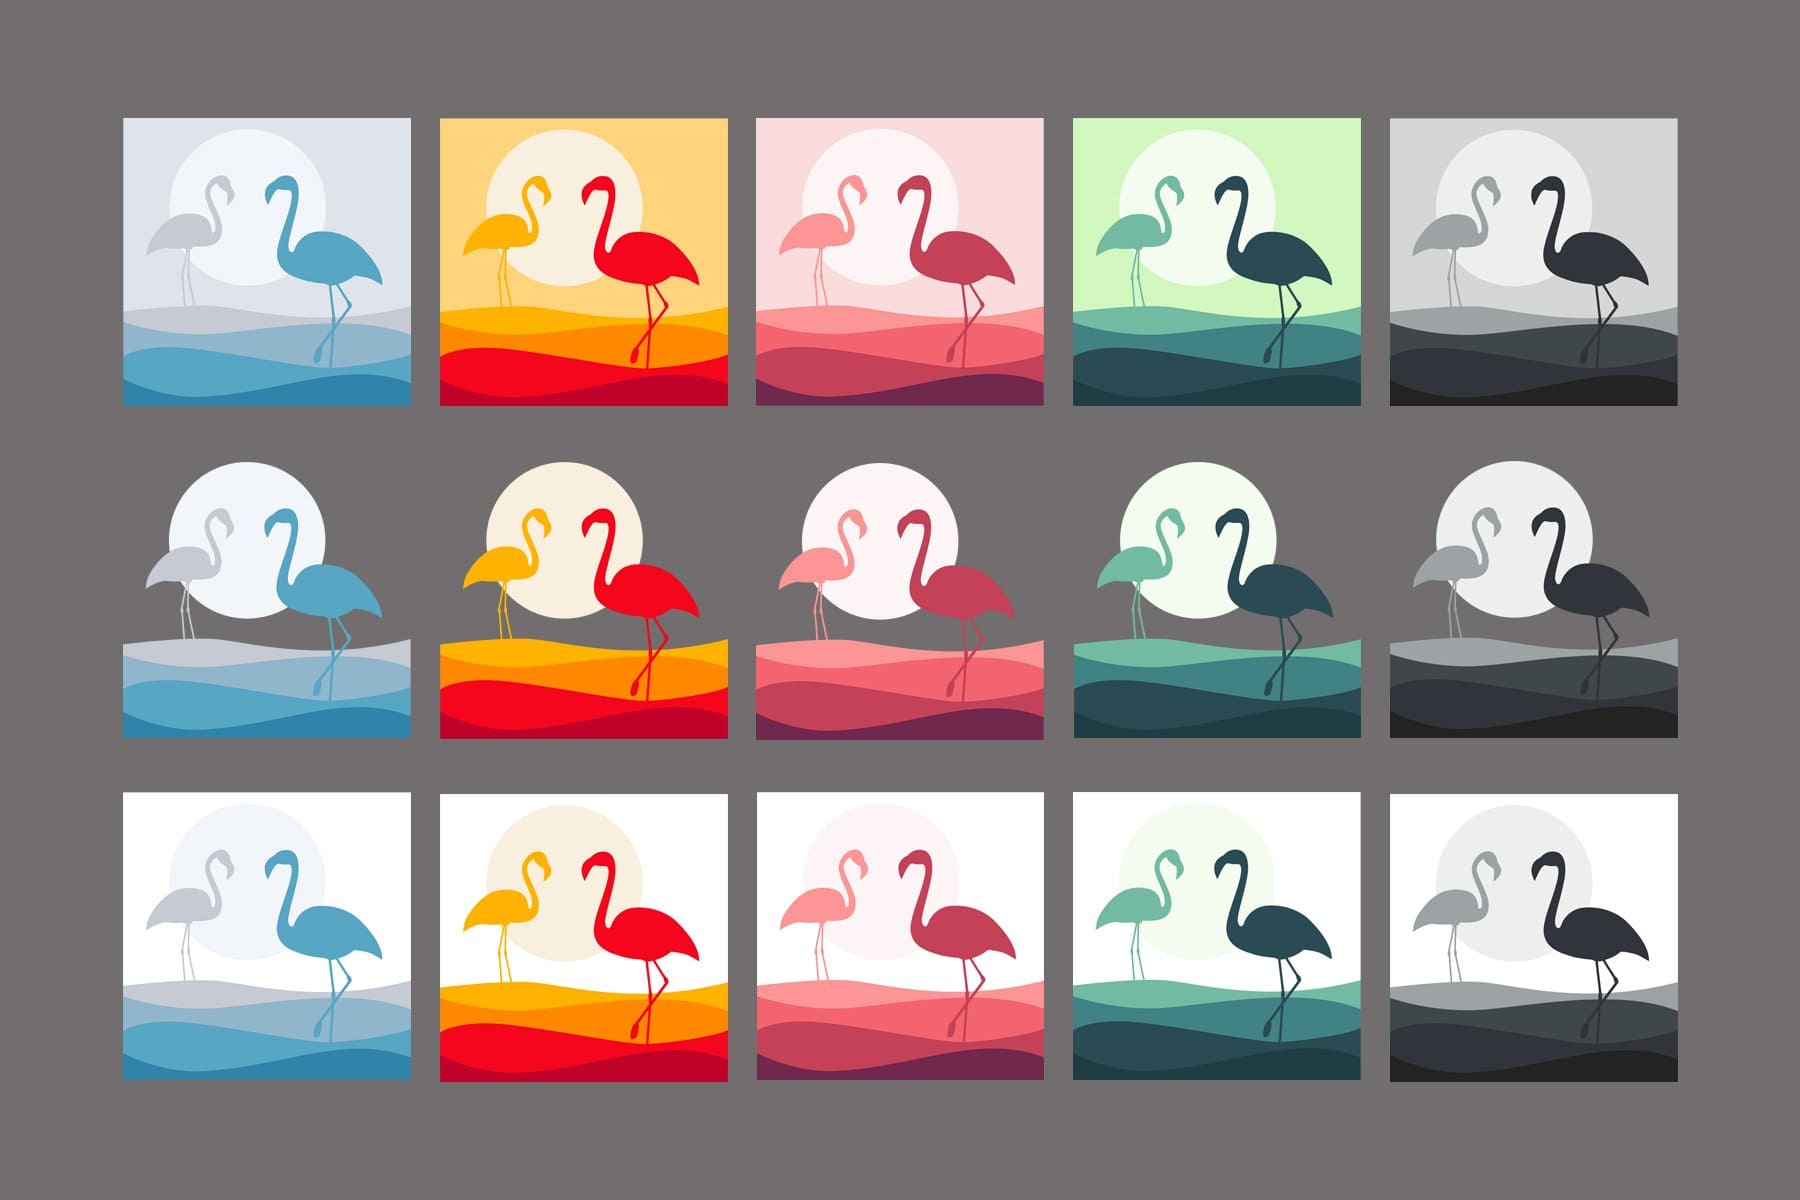 Images of flamingos and seascapes in different colors.